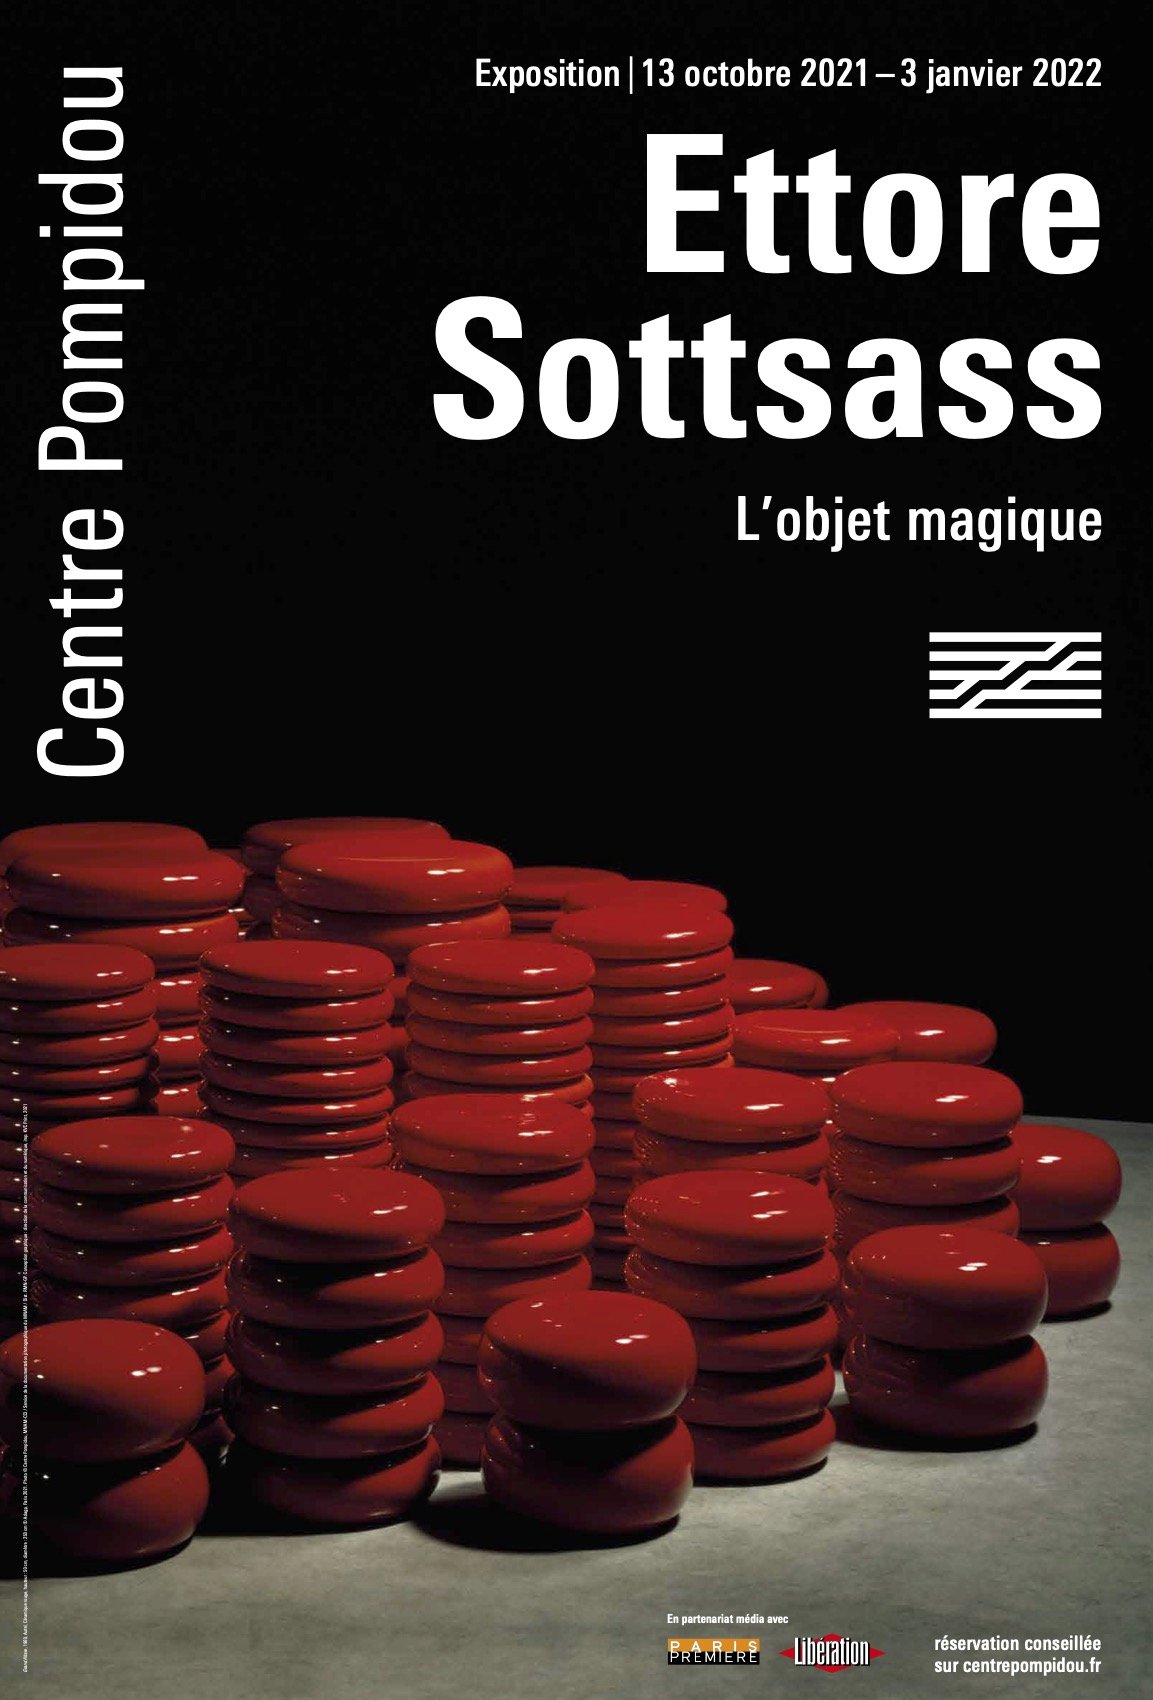 Ettore Sottsass The magical object